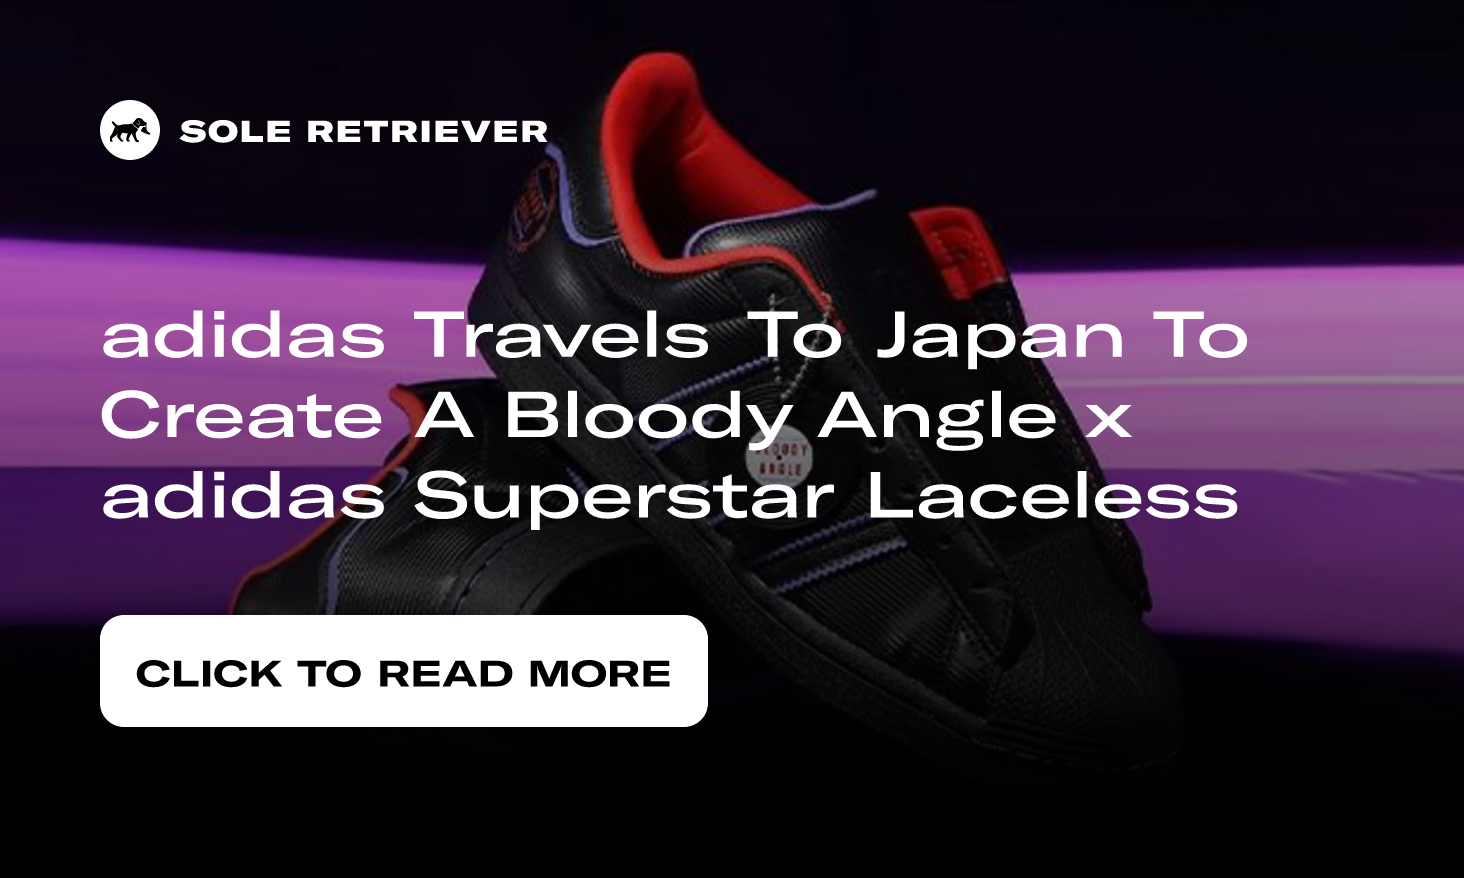 adidas Travels To Japan To Create A Bloody Angle x adidas